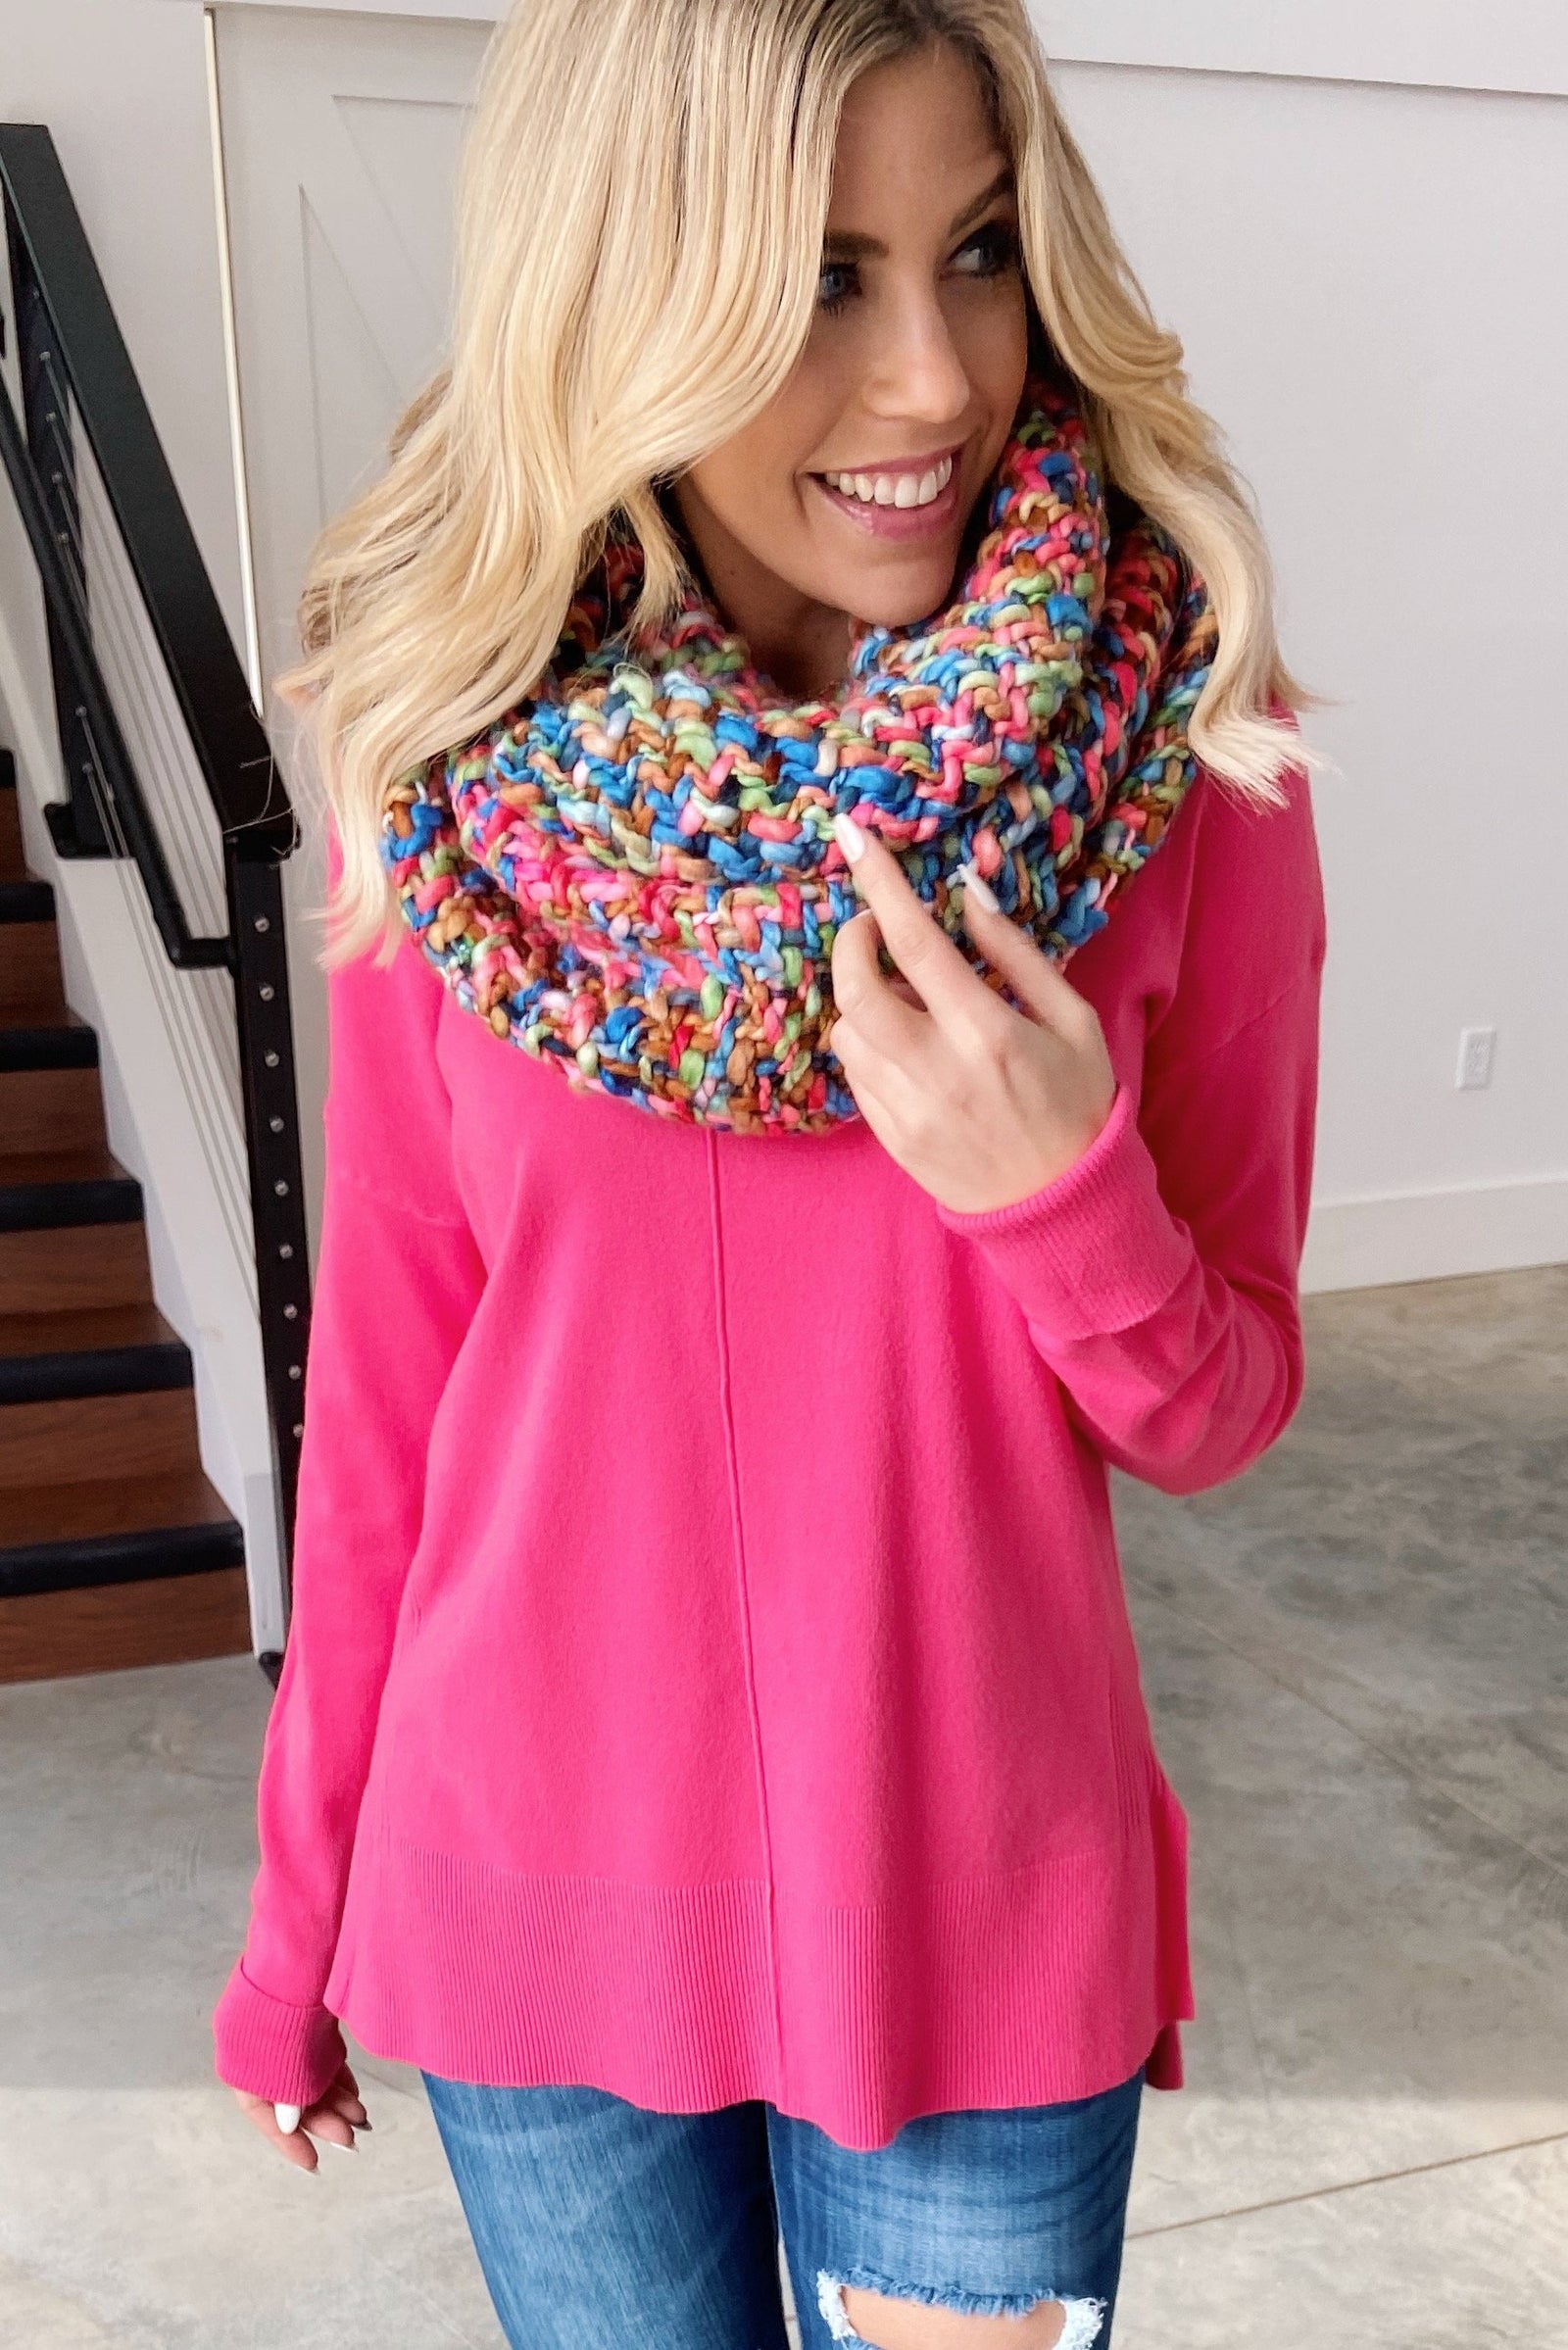 Chunky Knit Infinity Scarf- Multi-Colored – The Pulse Boutique